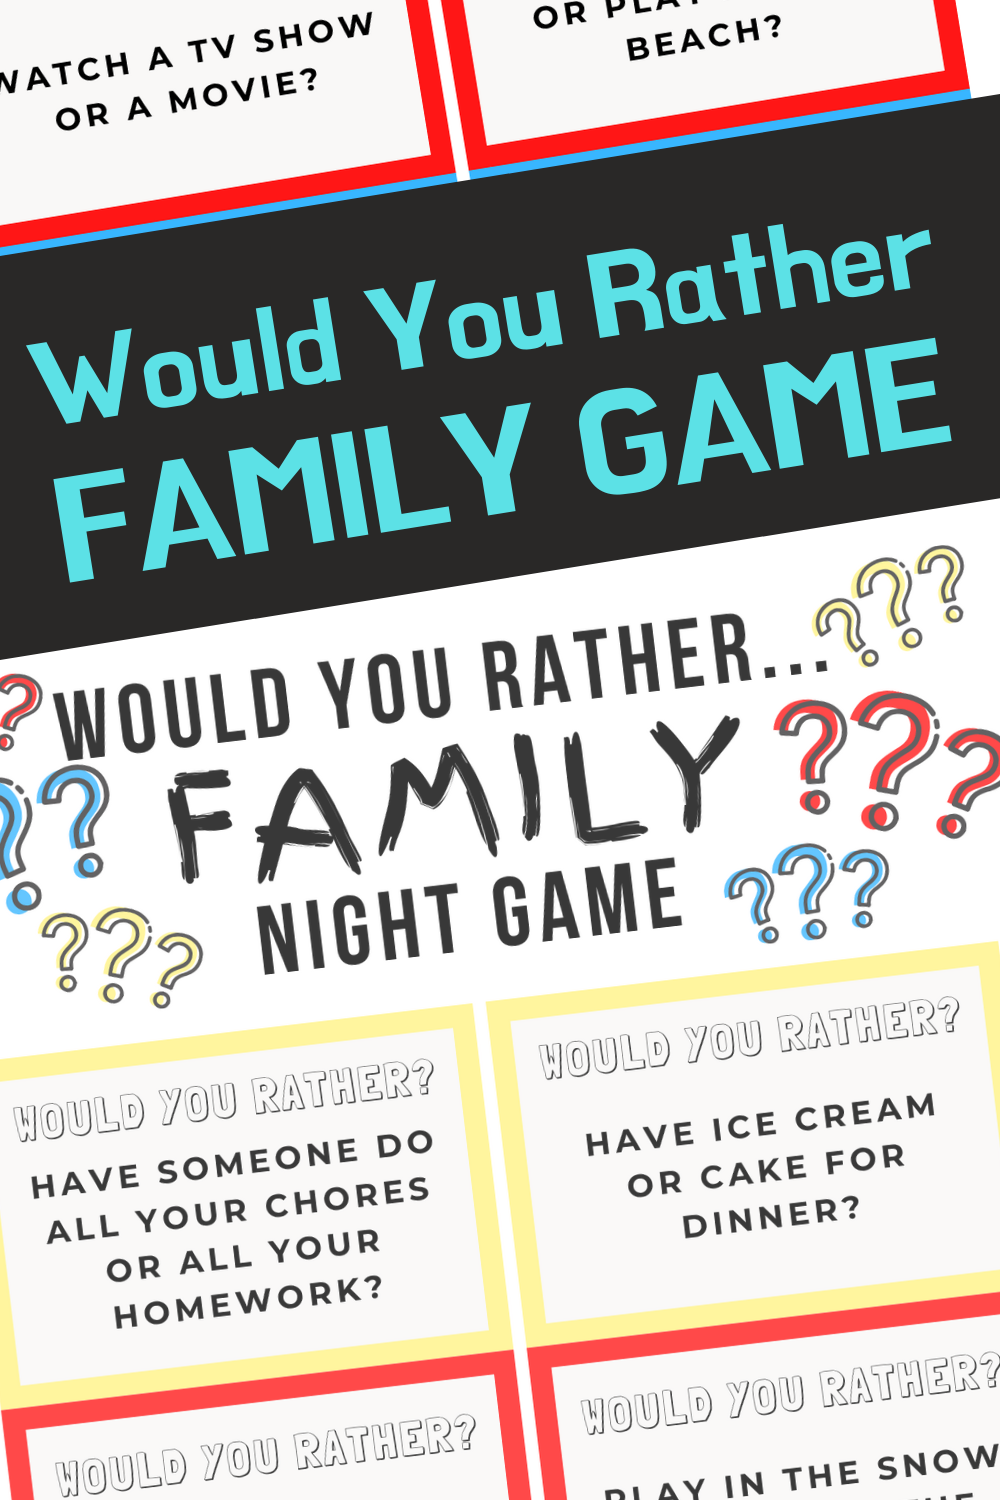 Would you Rather is a fun, family night game to encourage time together at home while also playing something fun and creative!  #printable #game #family 